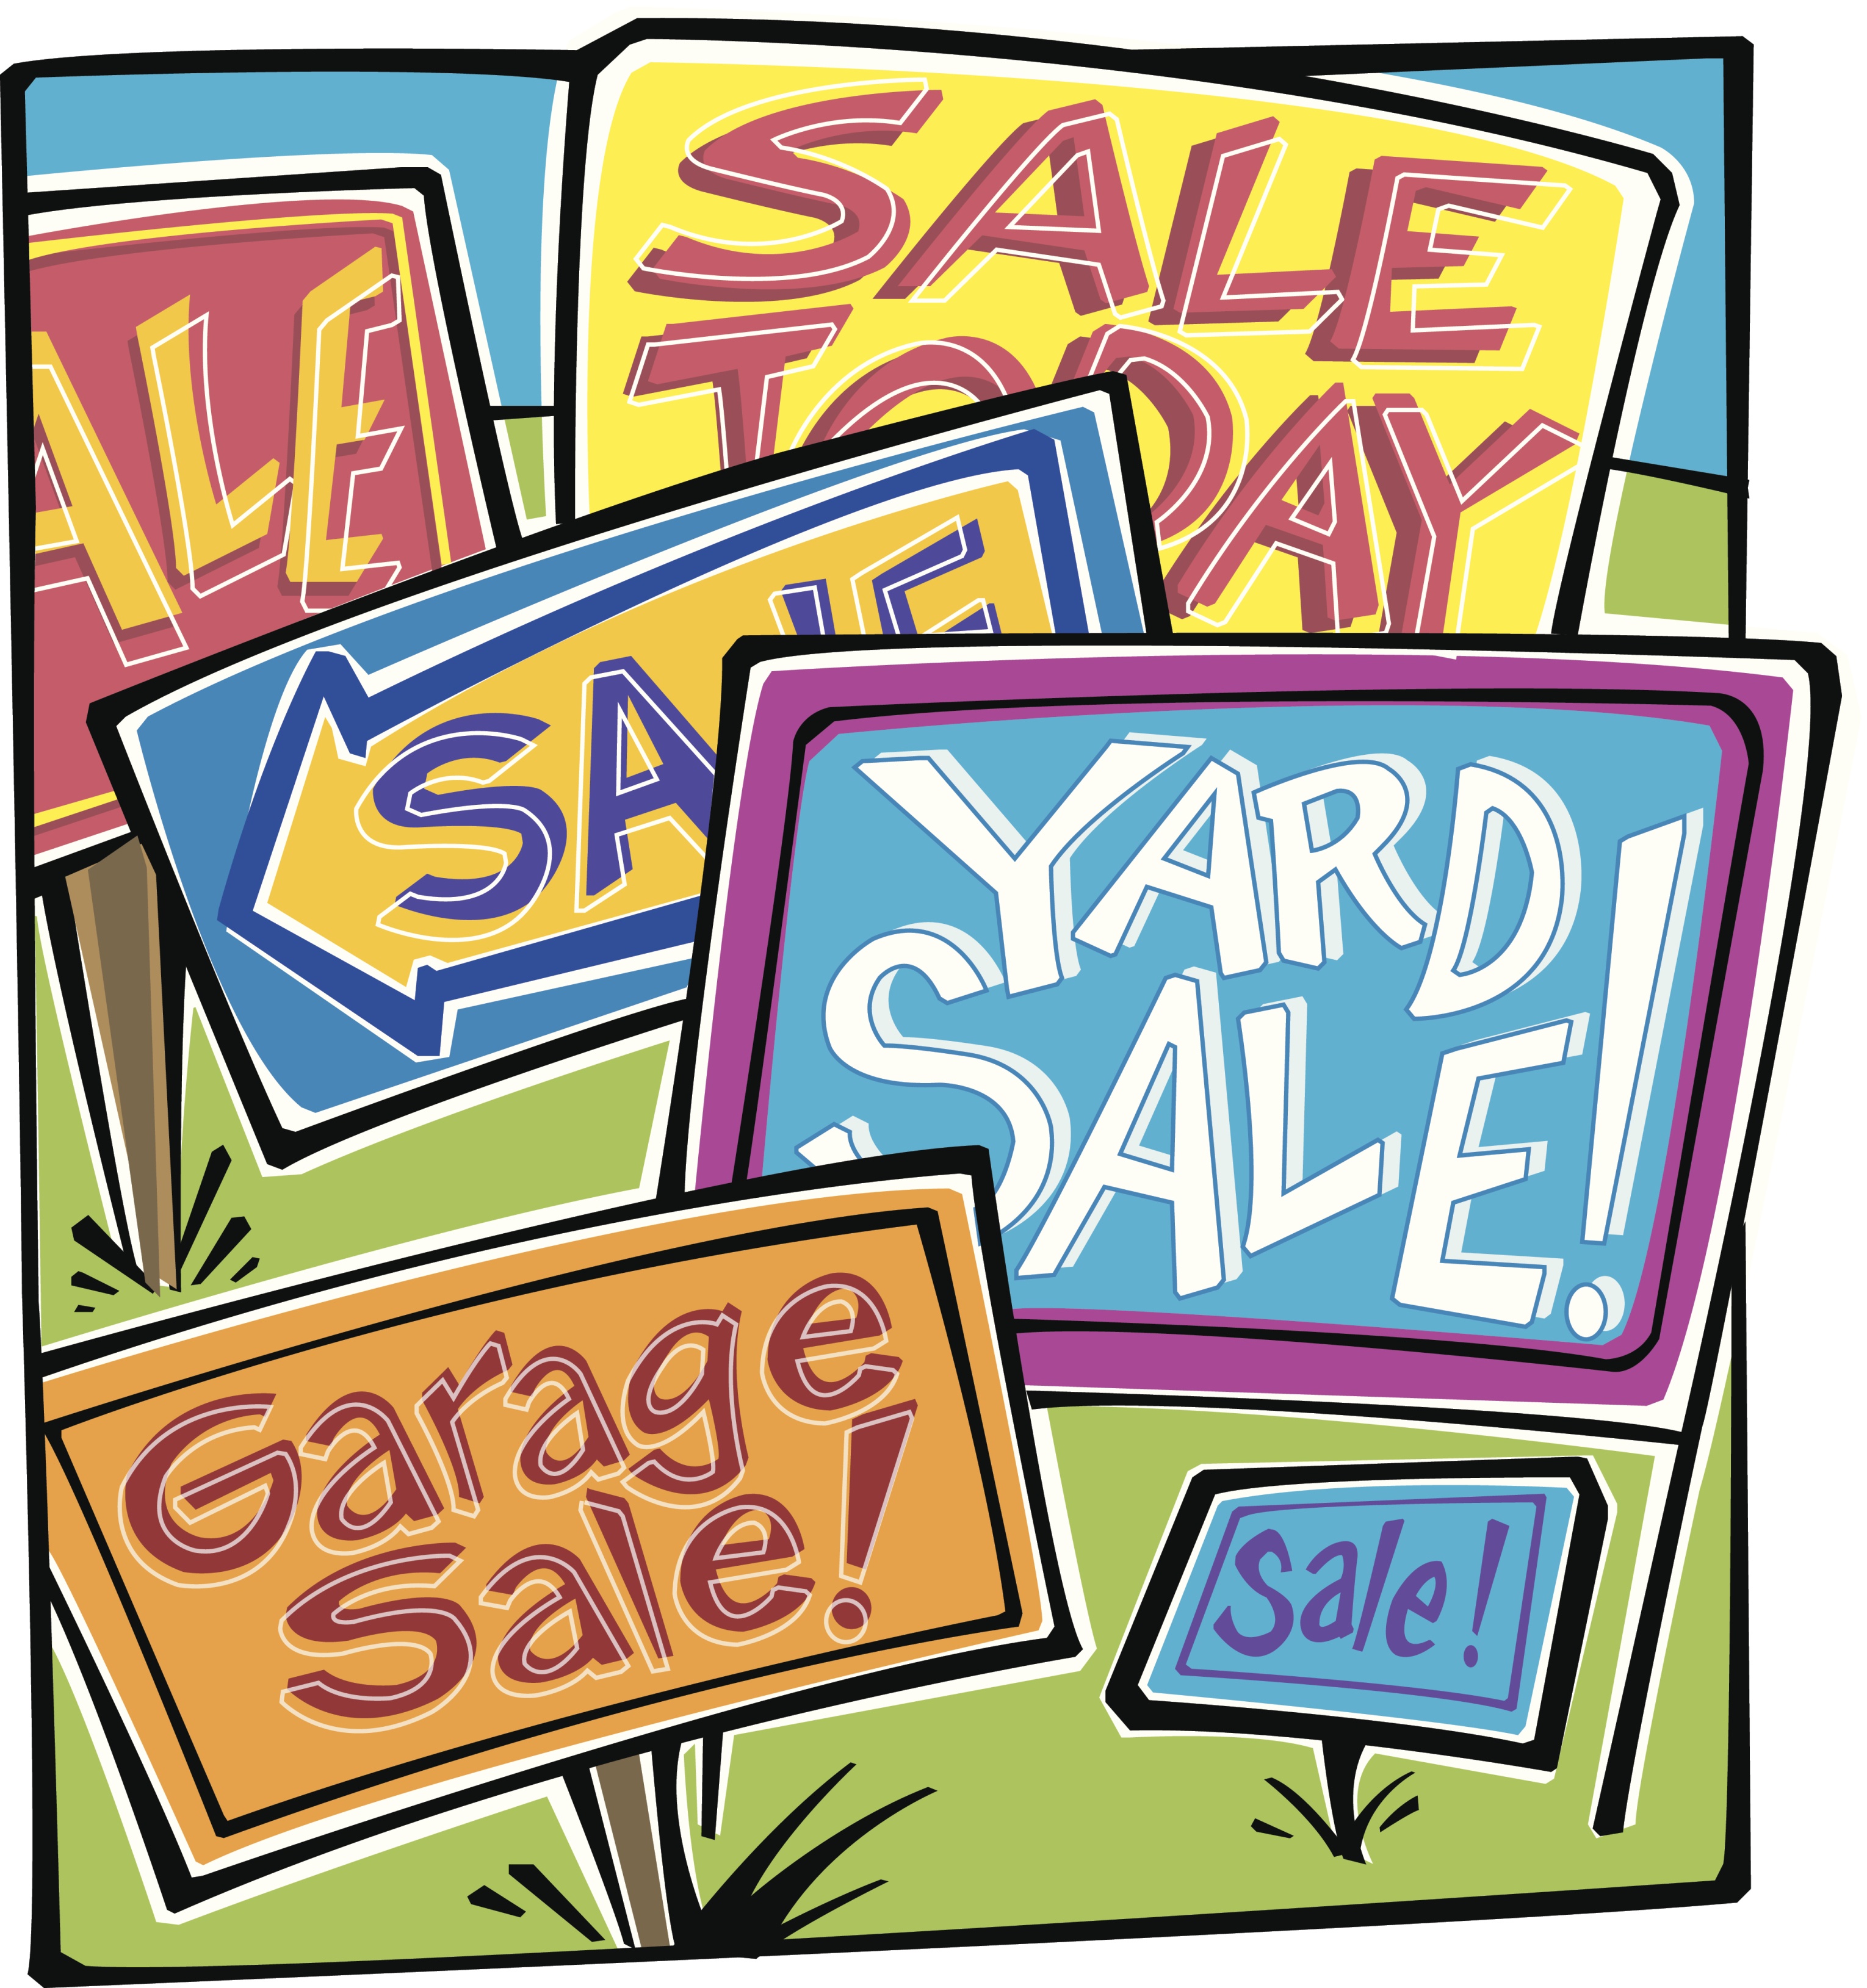 Creative Yard Sale Solutions for Landscaping - Cook Portable Warehouses